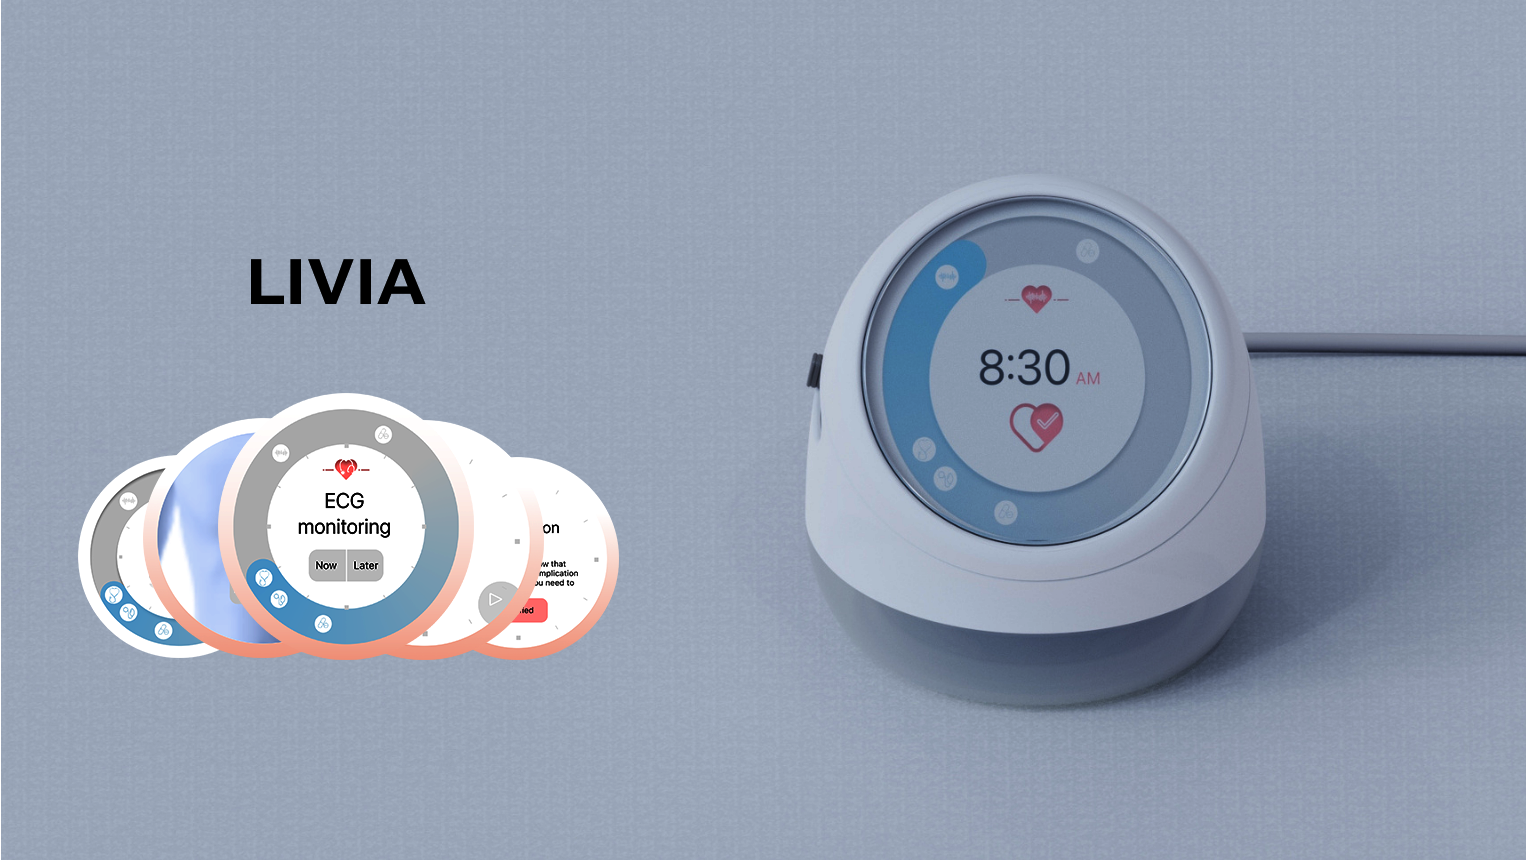 Livia: A device for assisting people diagnosed with CVD